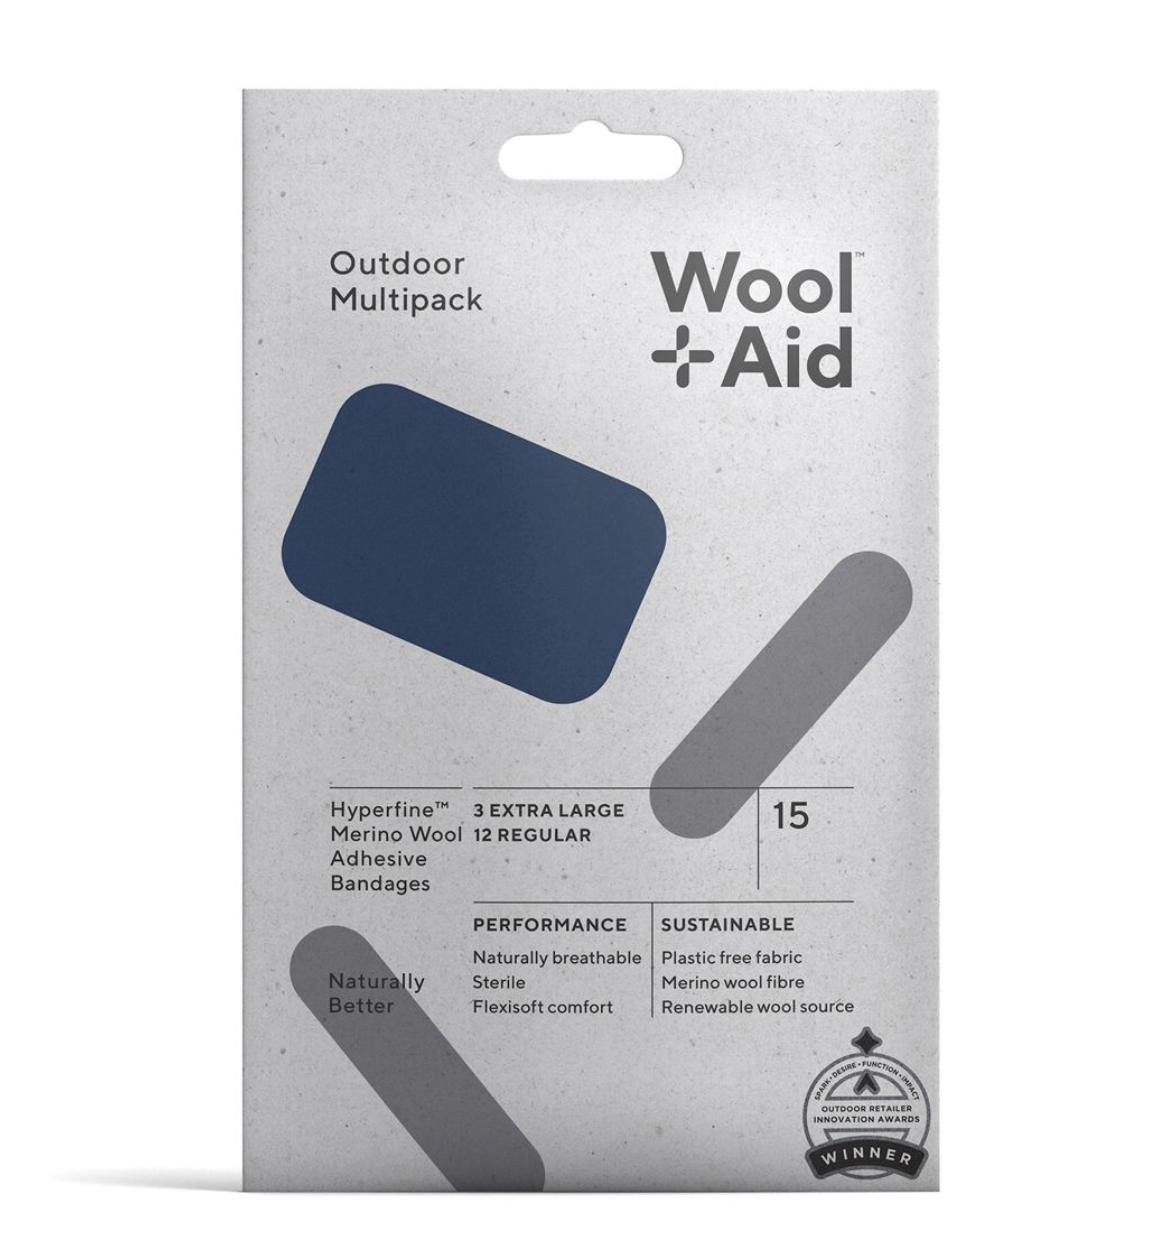 Woolaid Emergency and Outdoor Pack